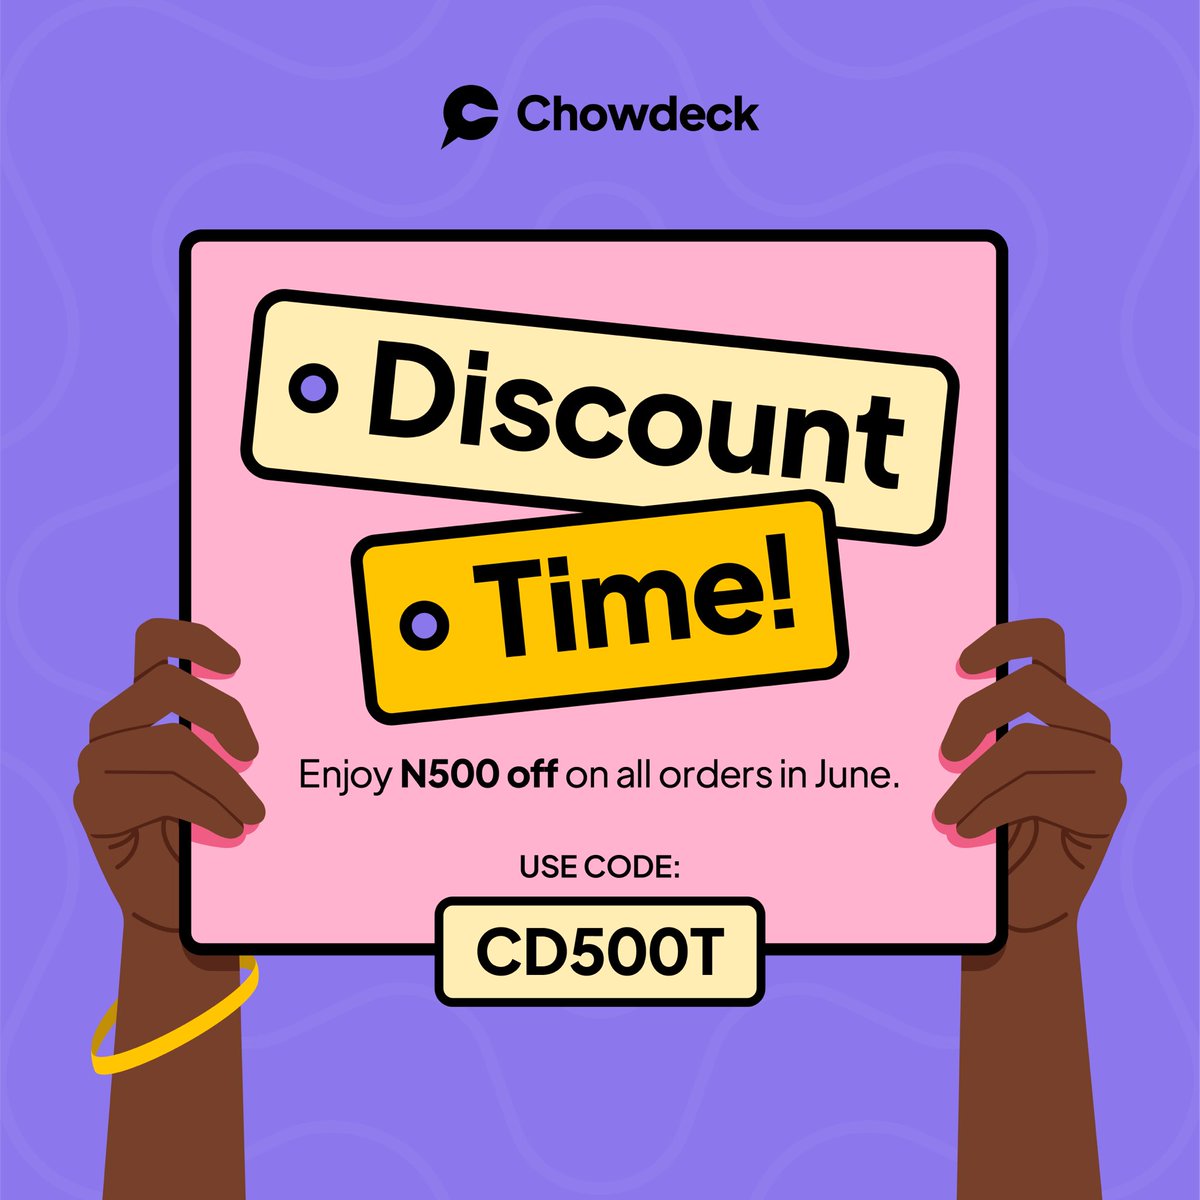 Yes, it's DISCOUNT TIME!

Enjoy N500 off all orders in June with discount code CD500T ✨

What are you waiting for? Order now! 🚨

#Chowdeck #FreeDelivery